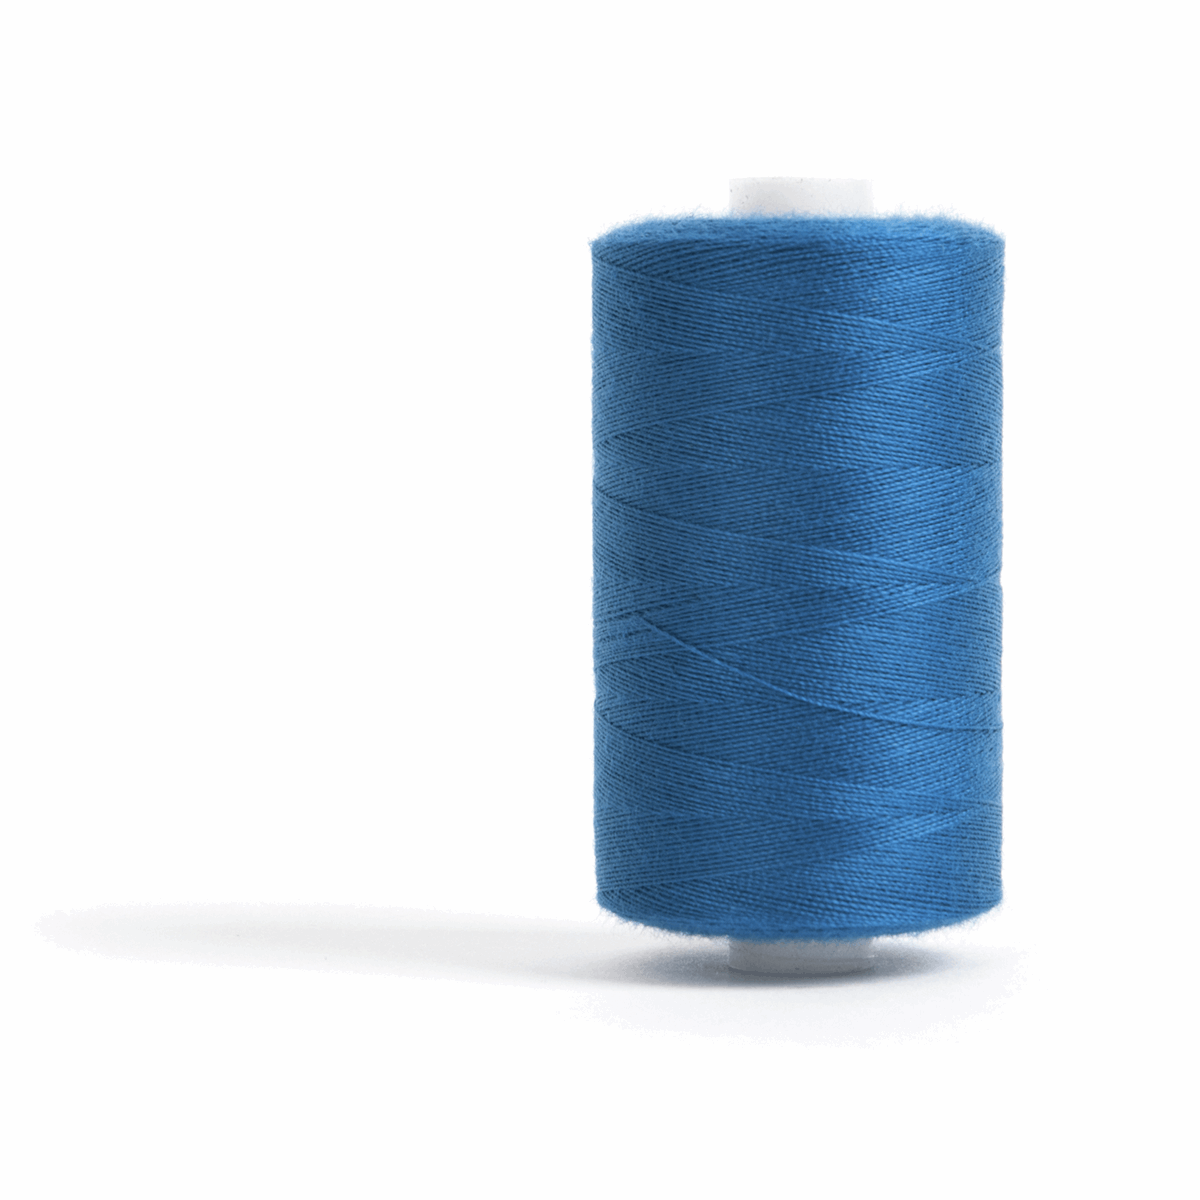 Thread 1000m Extra Large - Royal Blue - for Sewing and Overlocking